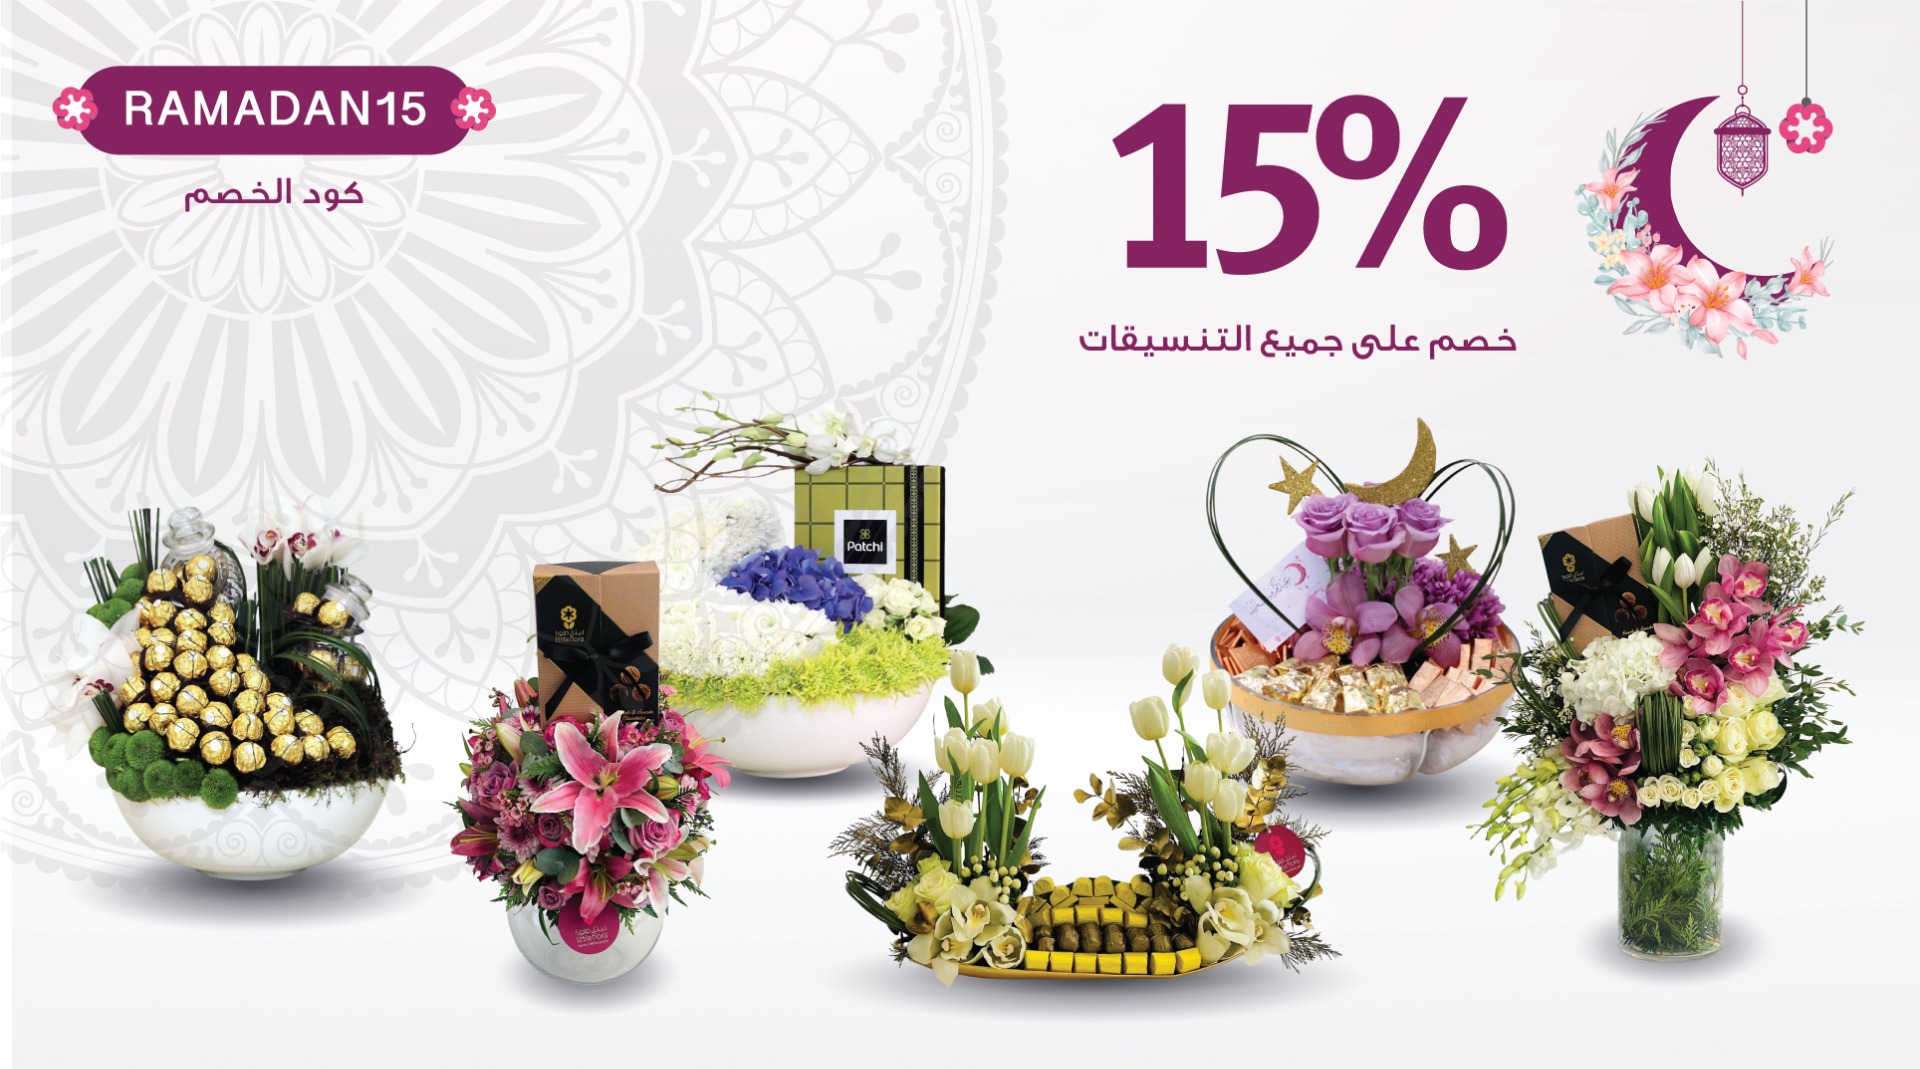 special-occasions/online-flowers-delivery-for-ramadan.html